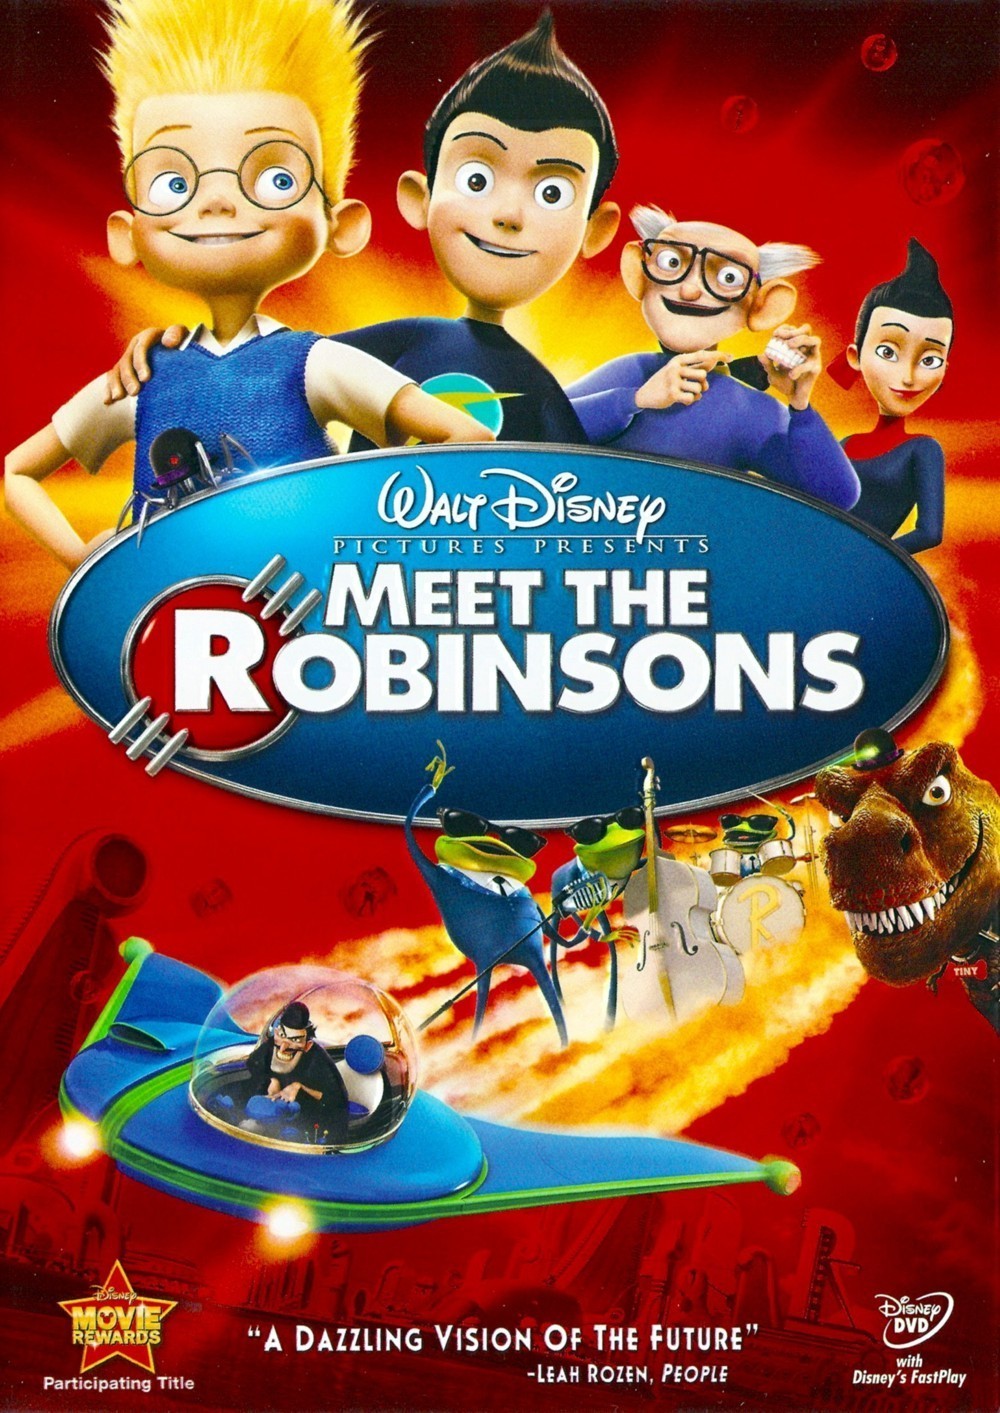 Meet the Robinsons (2007) | Movie and TV Wiki | Fandom powered by Wikia